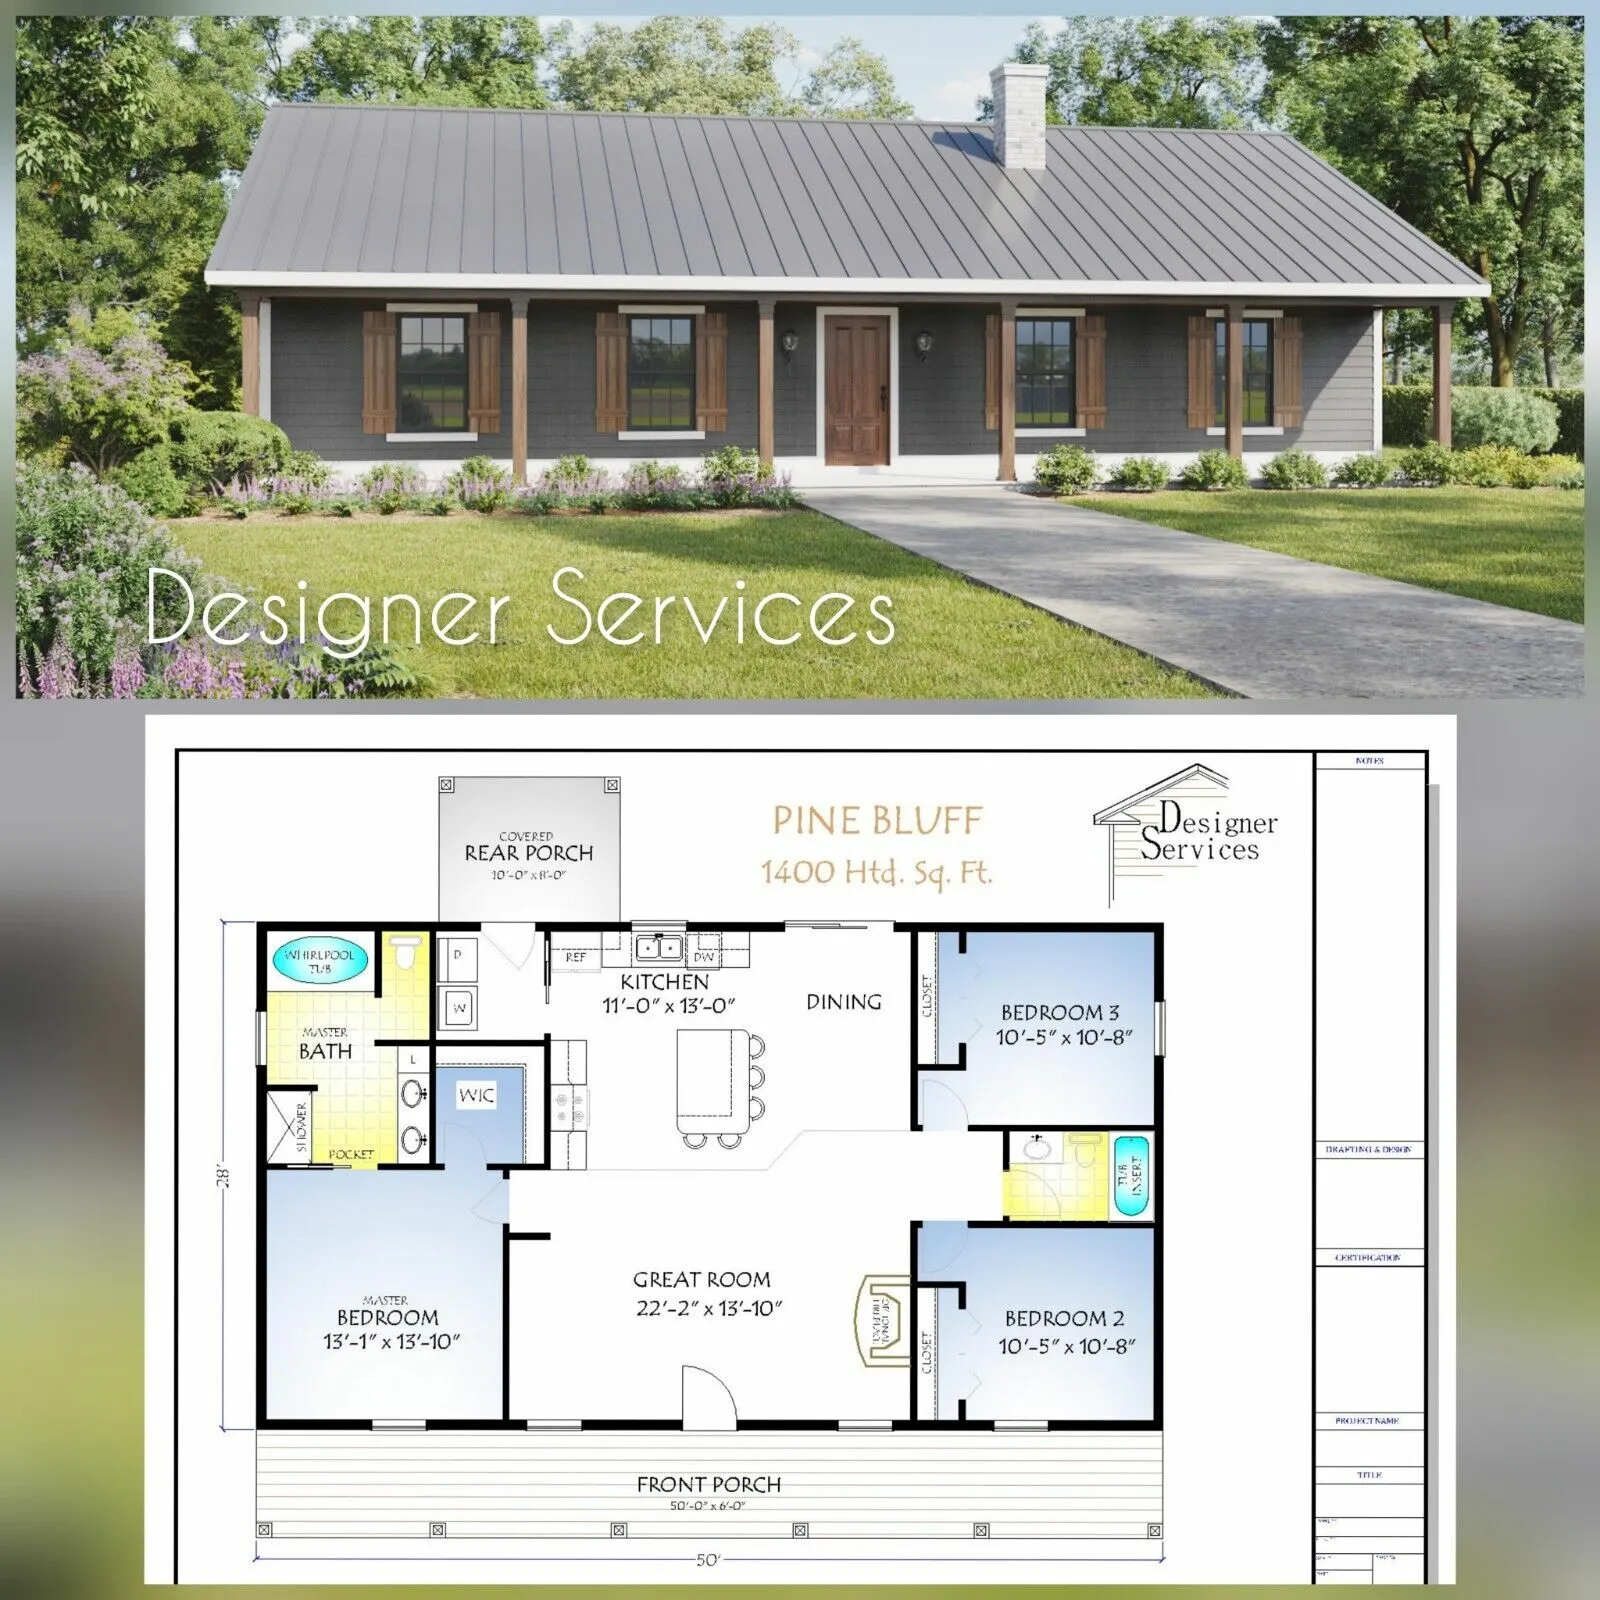 Pine Bluff House Plans 1400 Sq Ft